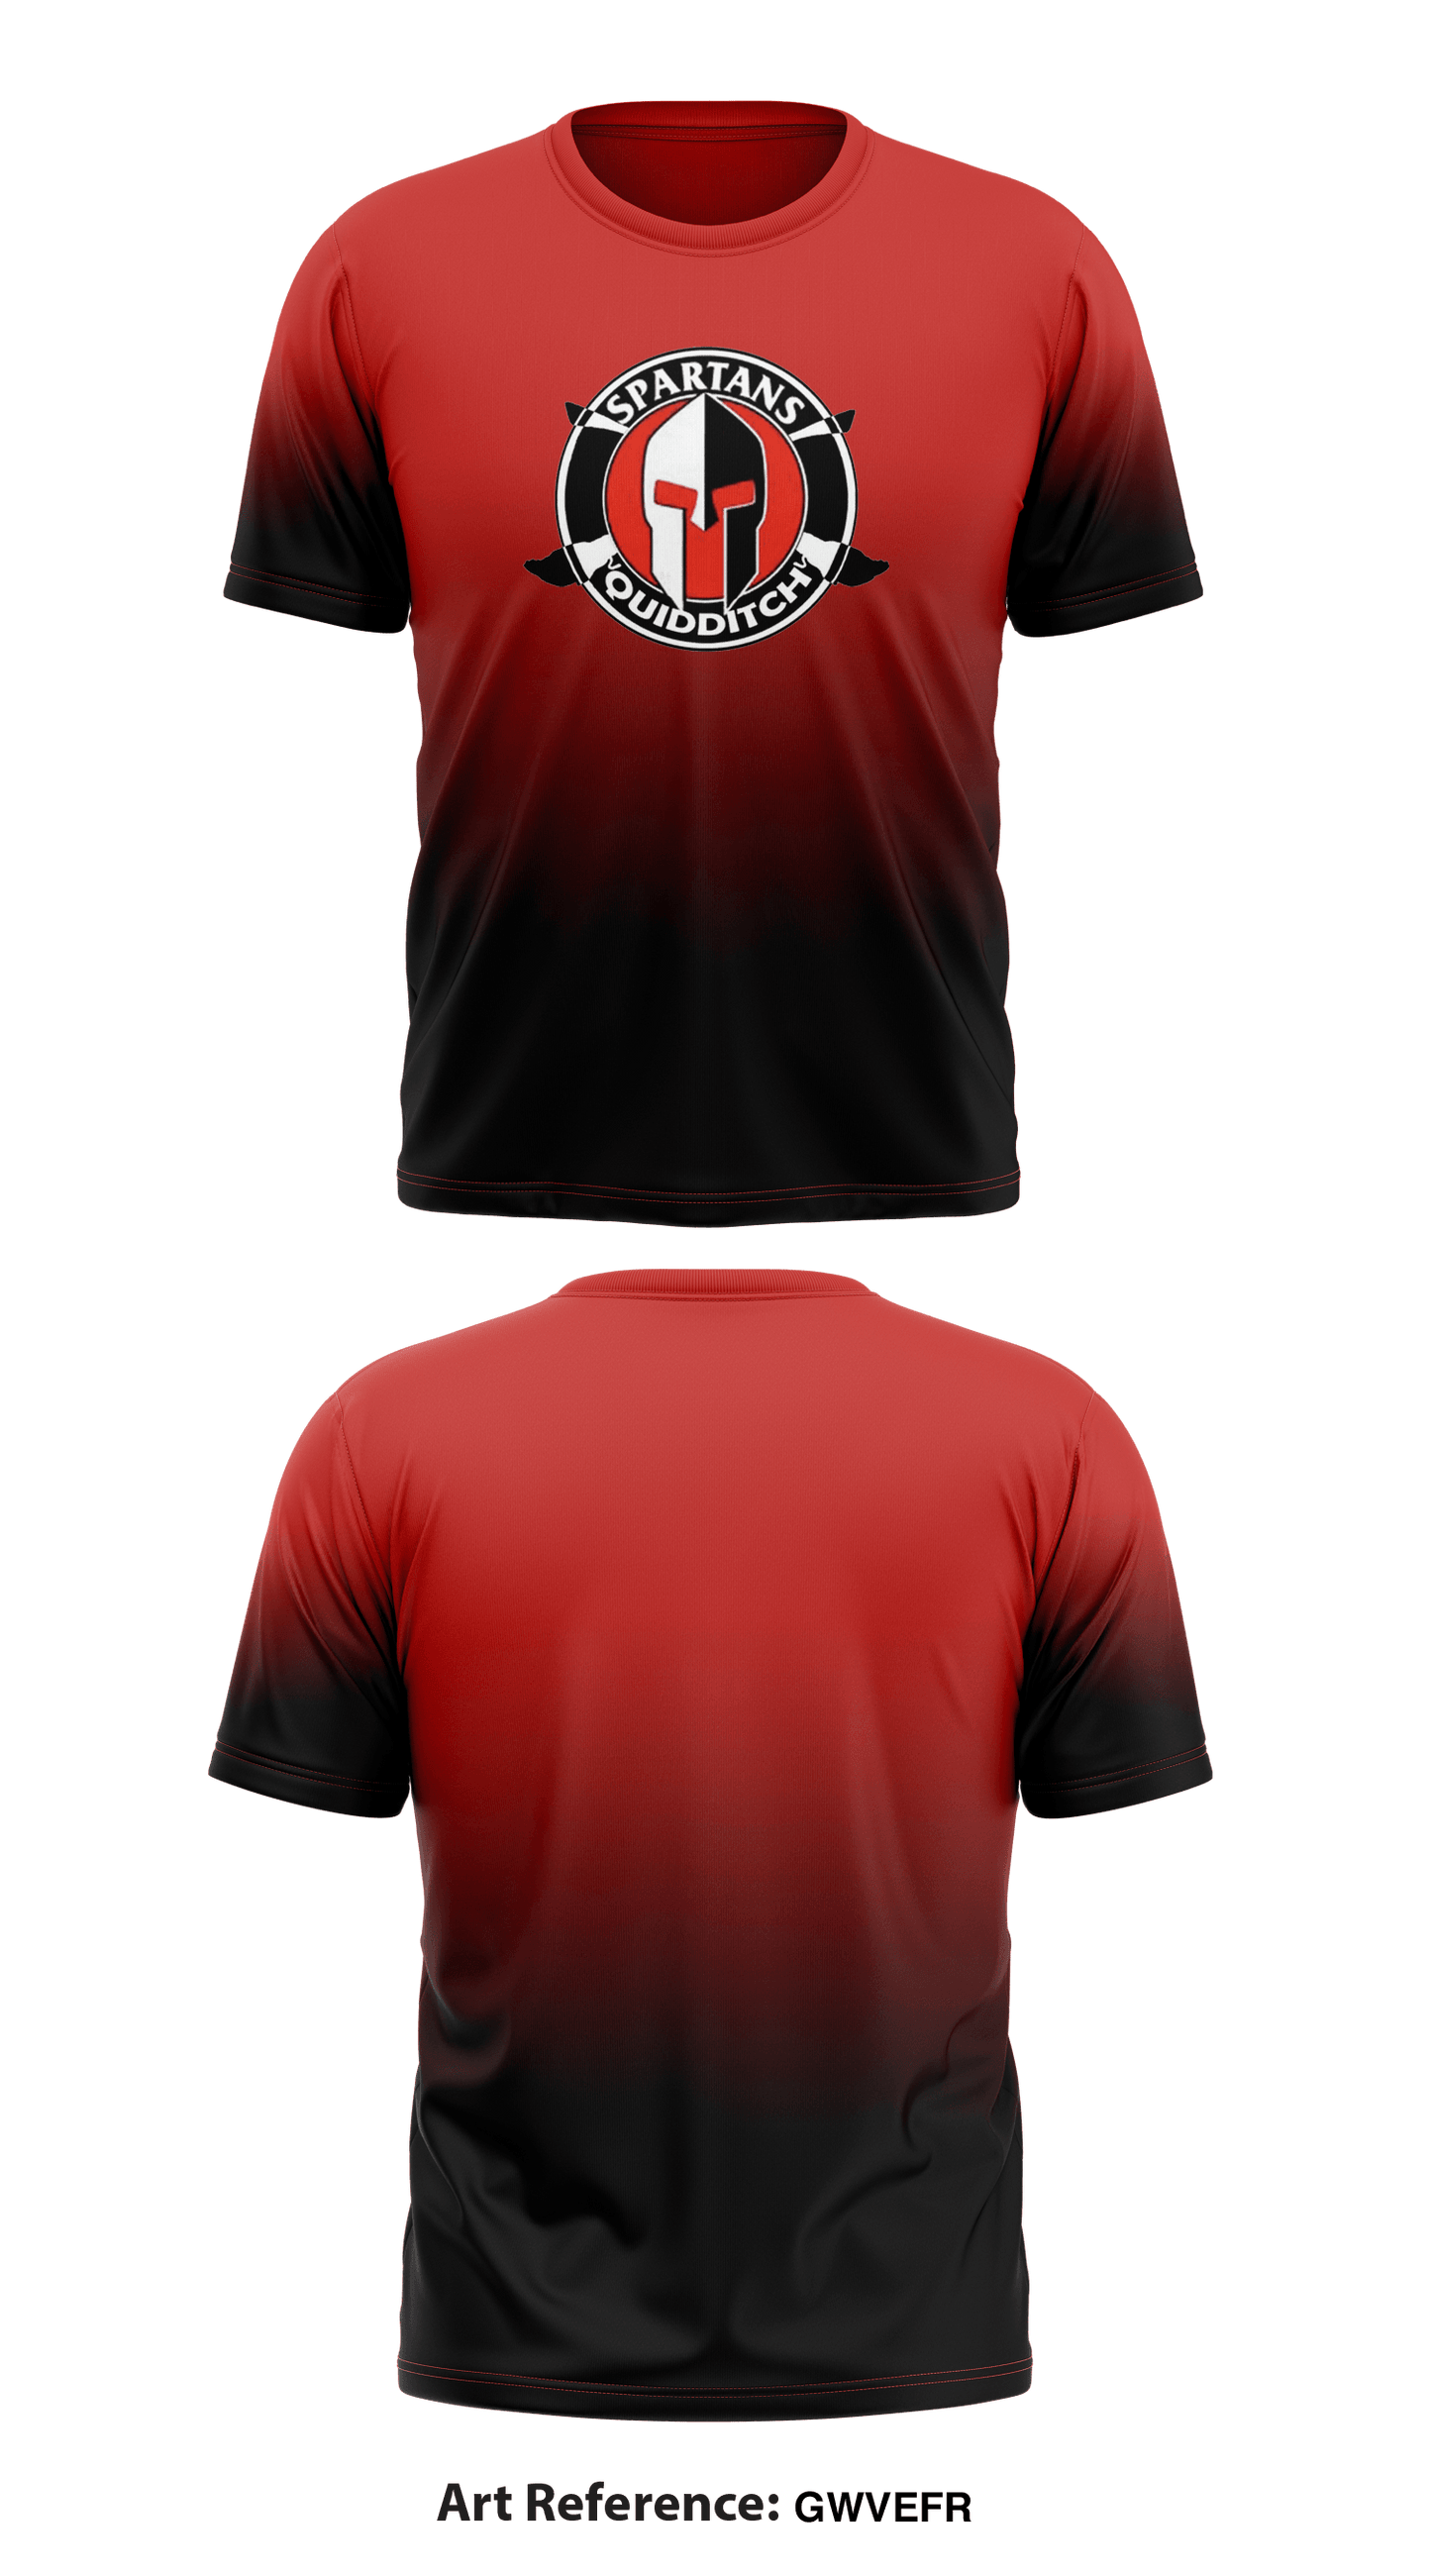 Victoria Spartans Quidditch  Store 1 Core Men's SS Performance Tee - GwvEFR